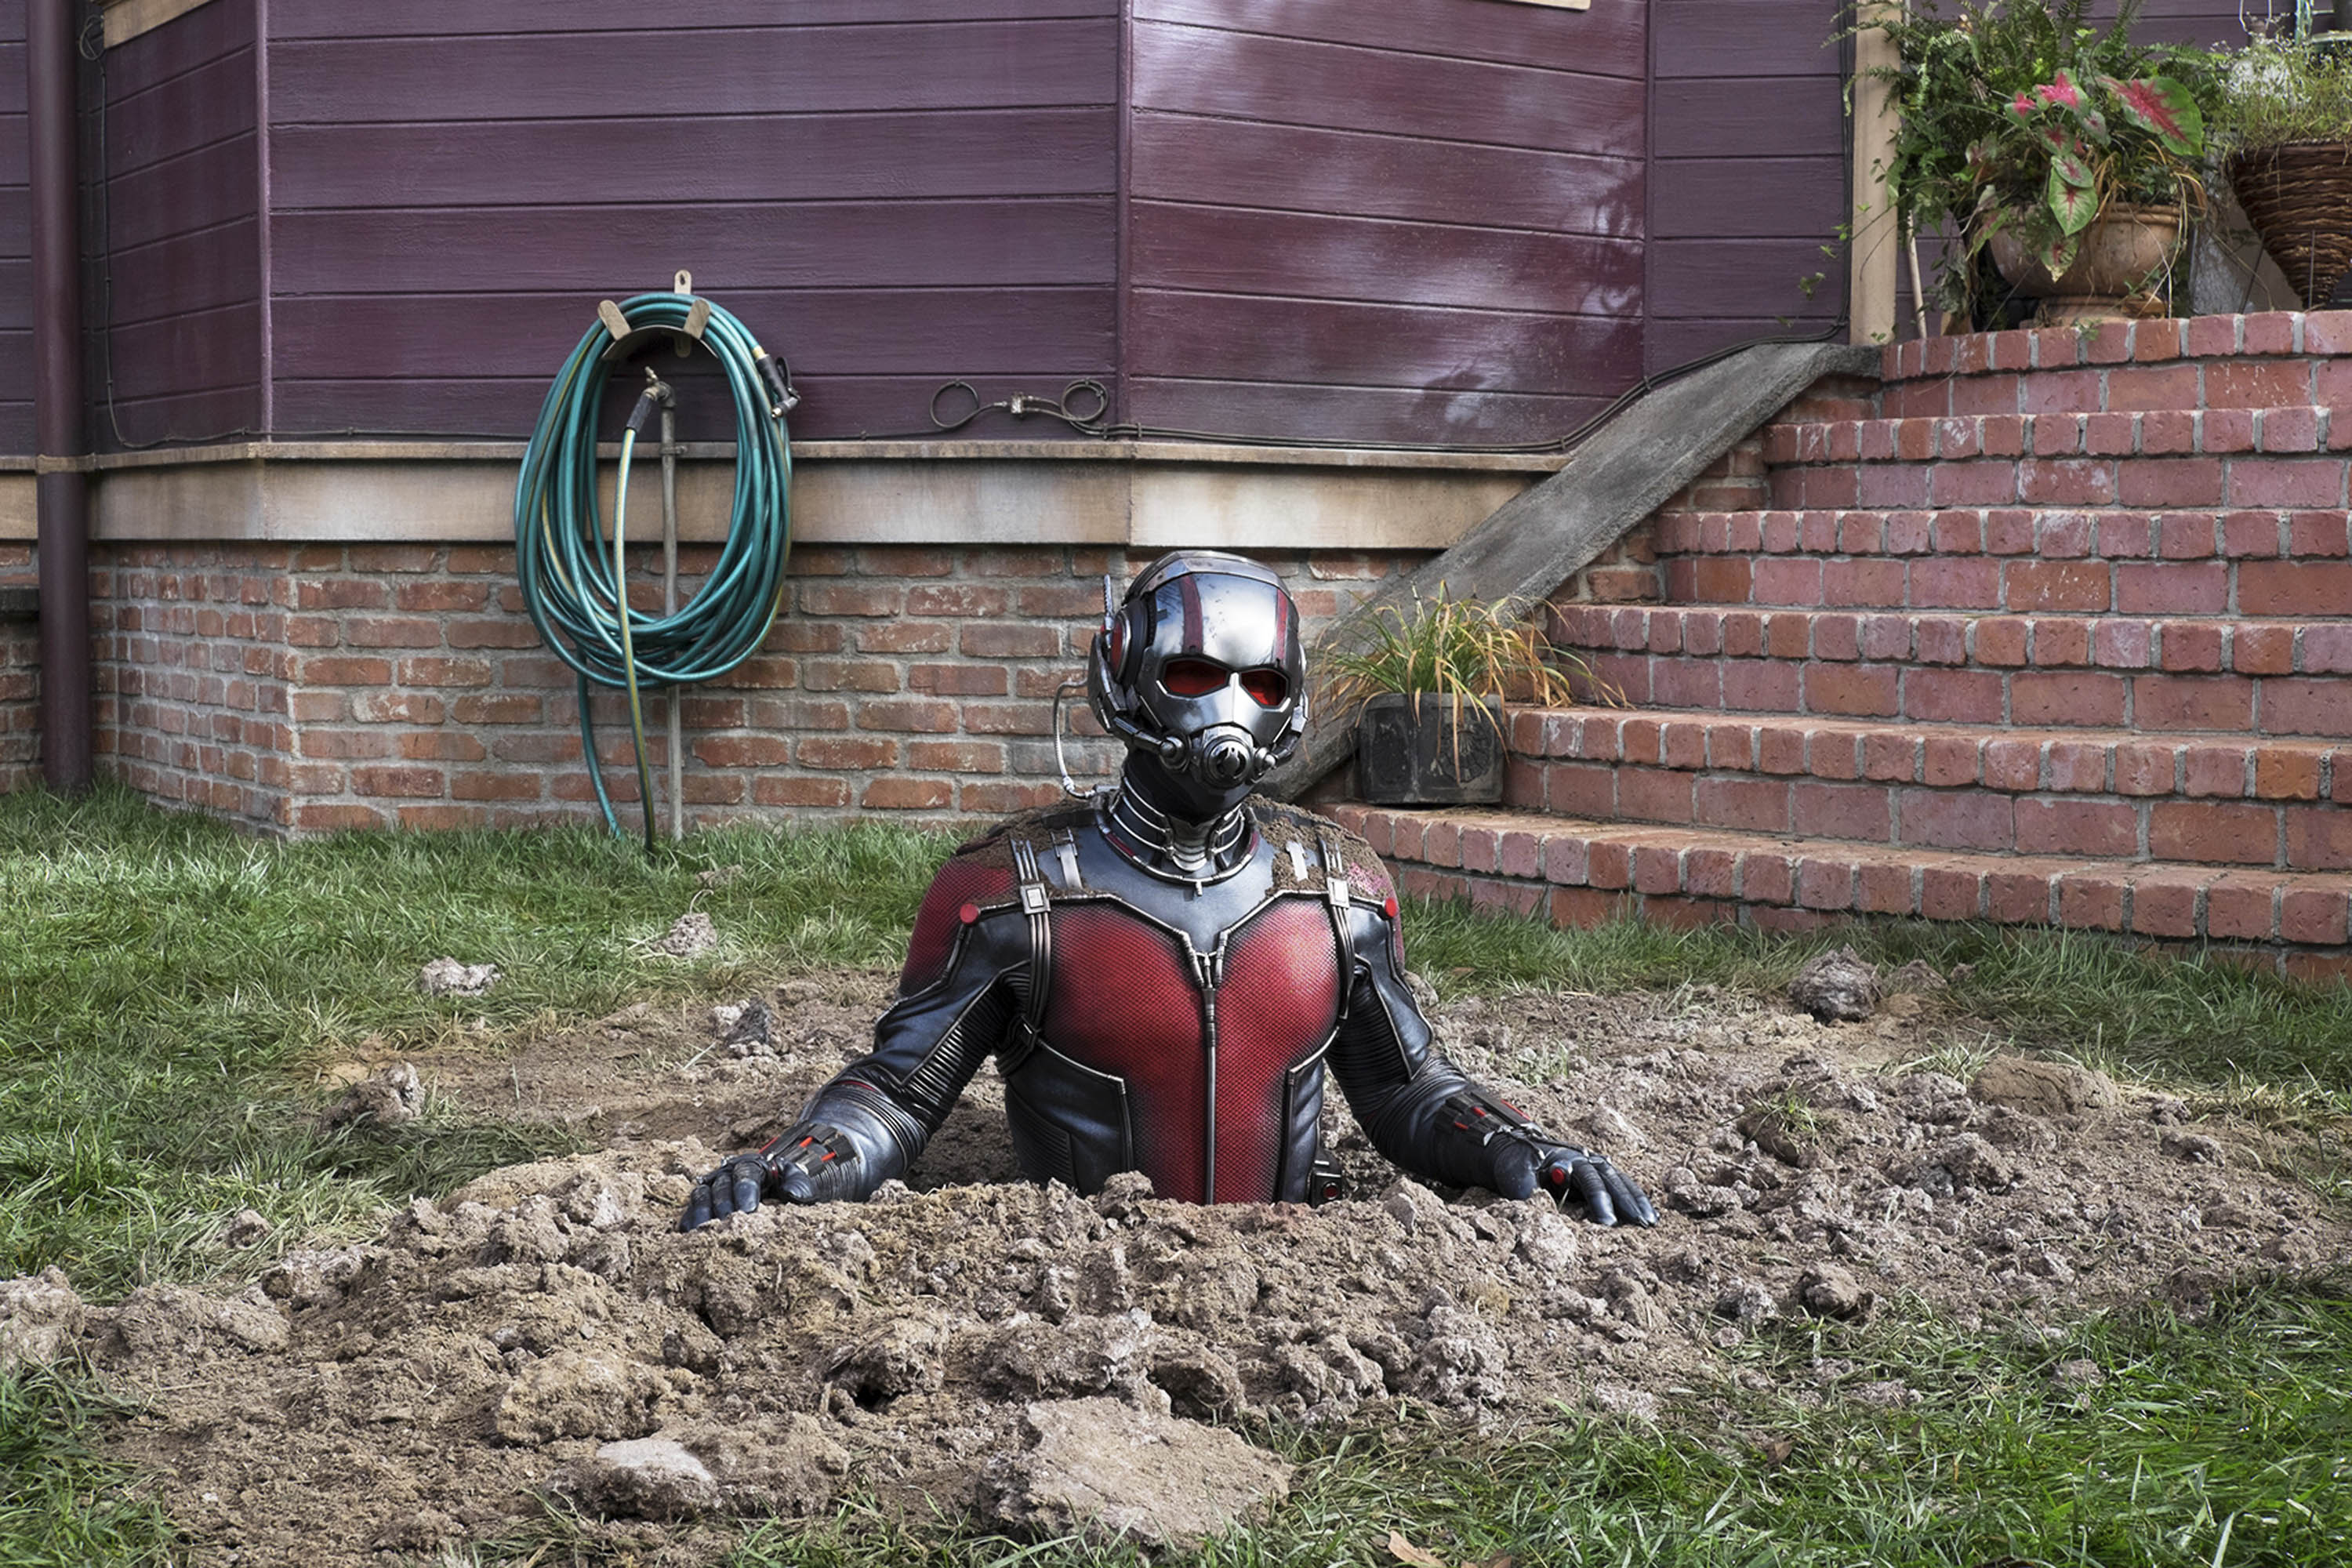 As its least noble superhero, Paul Rudd’s Ant-Man brings warmth and pathos to the Marvel universe. (Marvel/Disney)